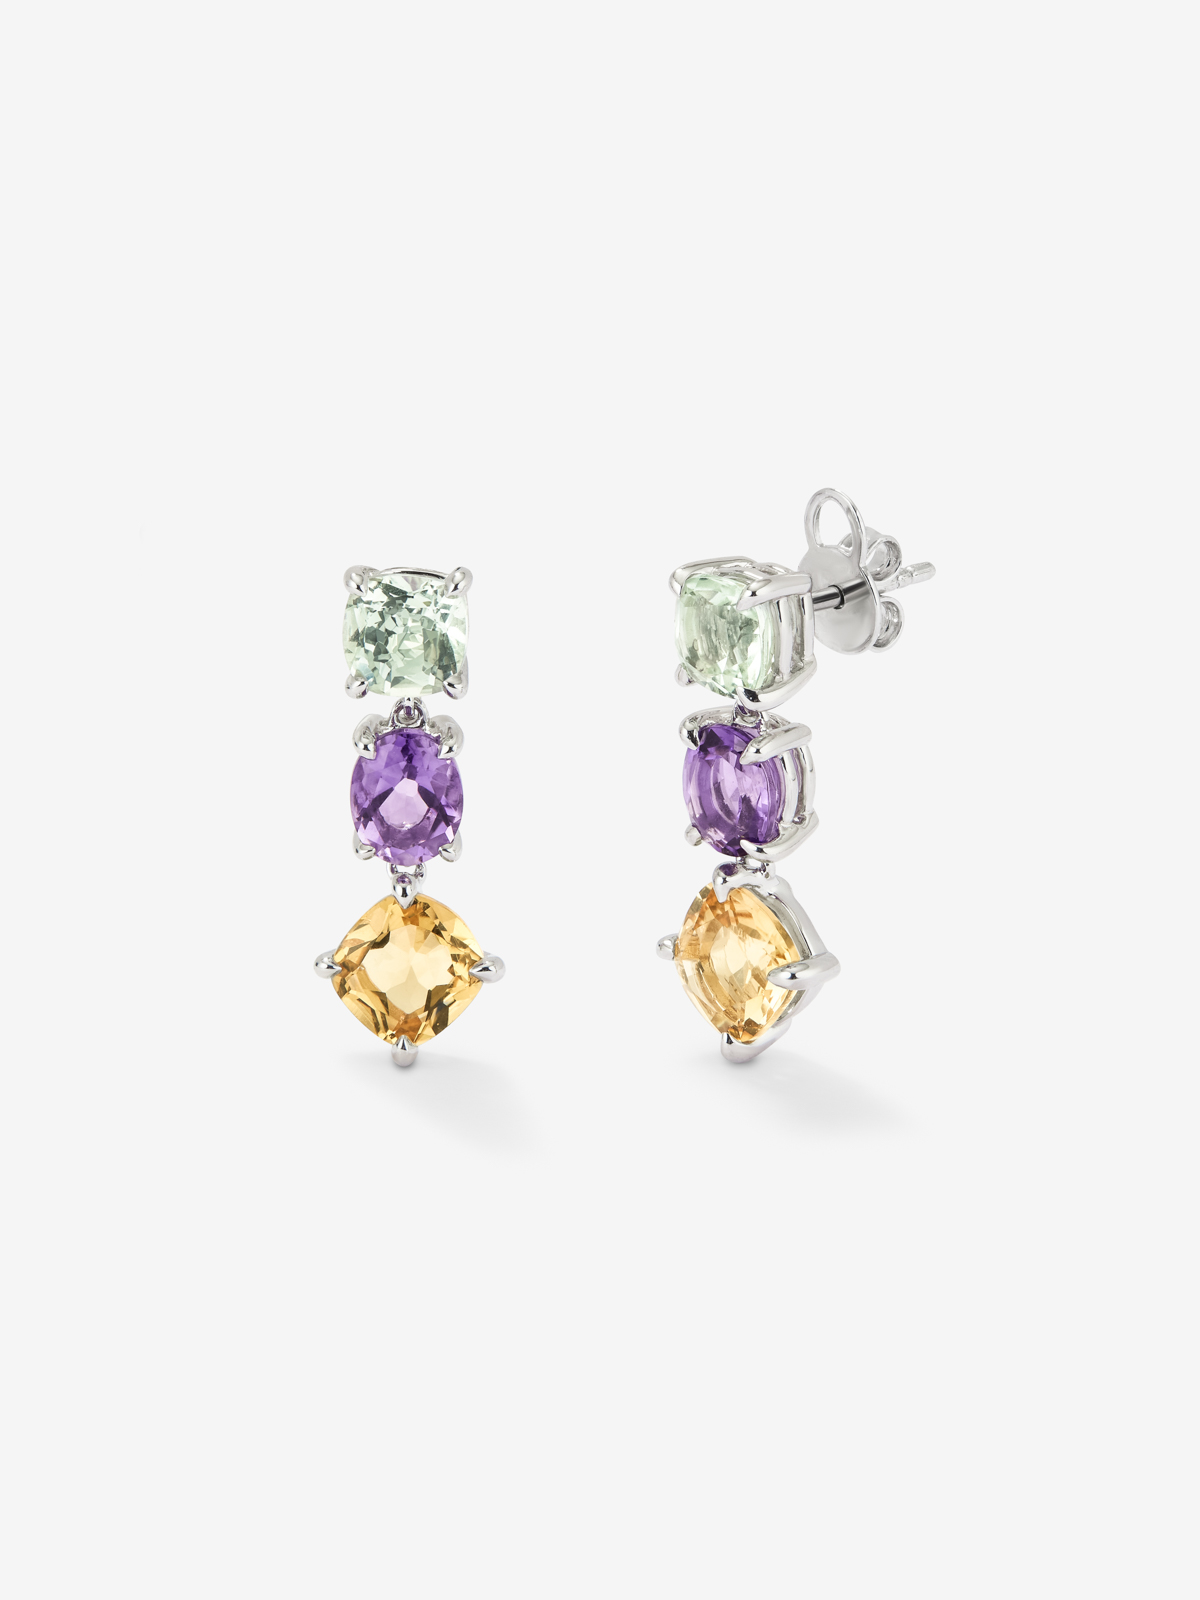 925 long silver earrings with green, purple and citrine ameter